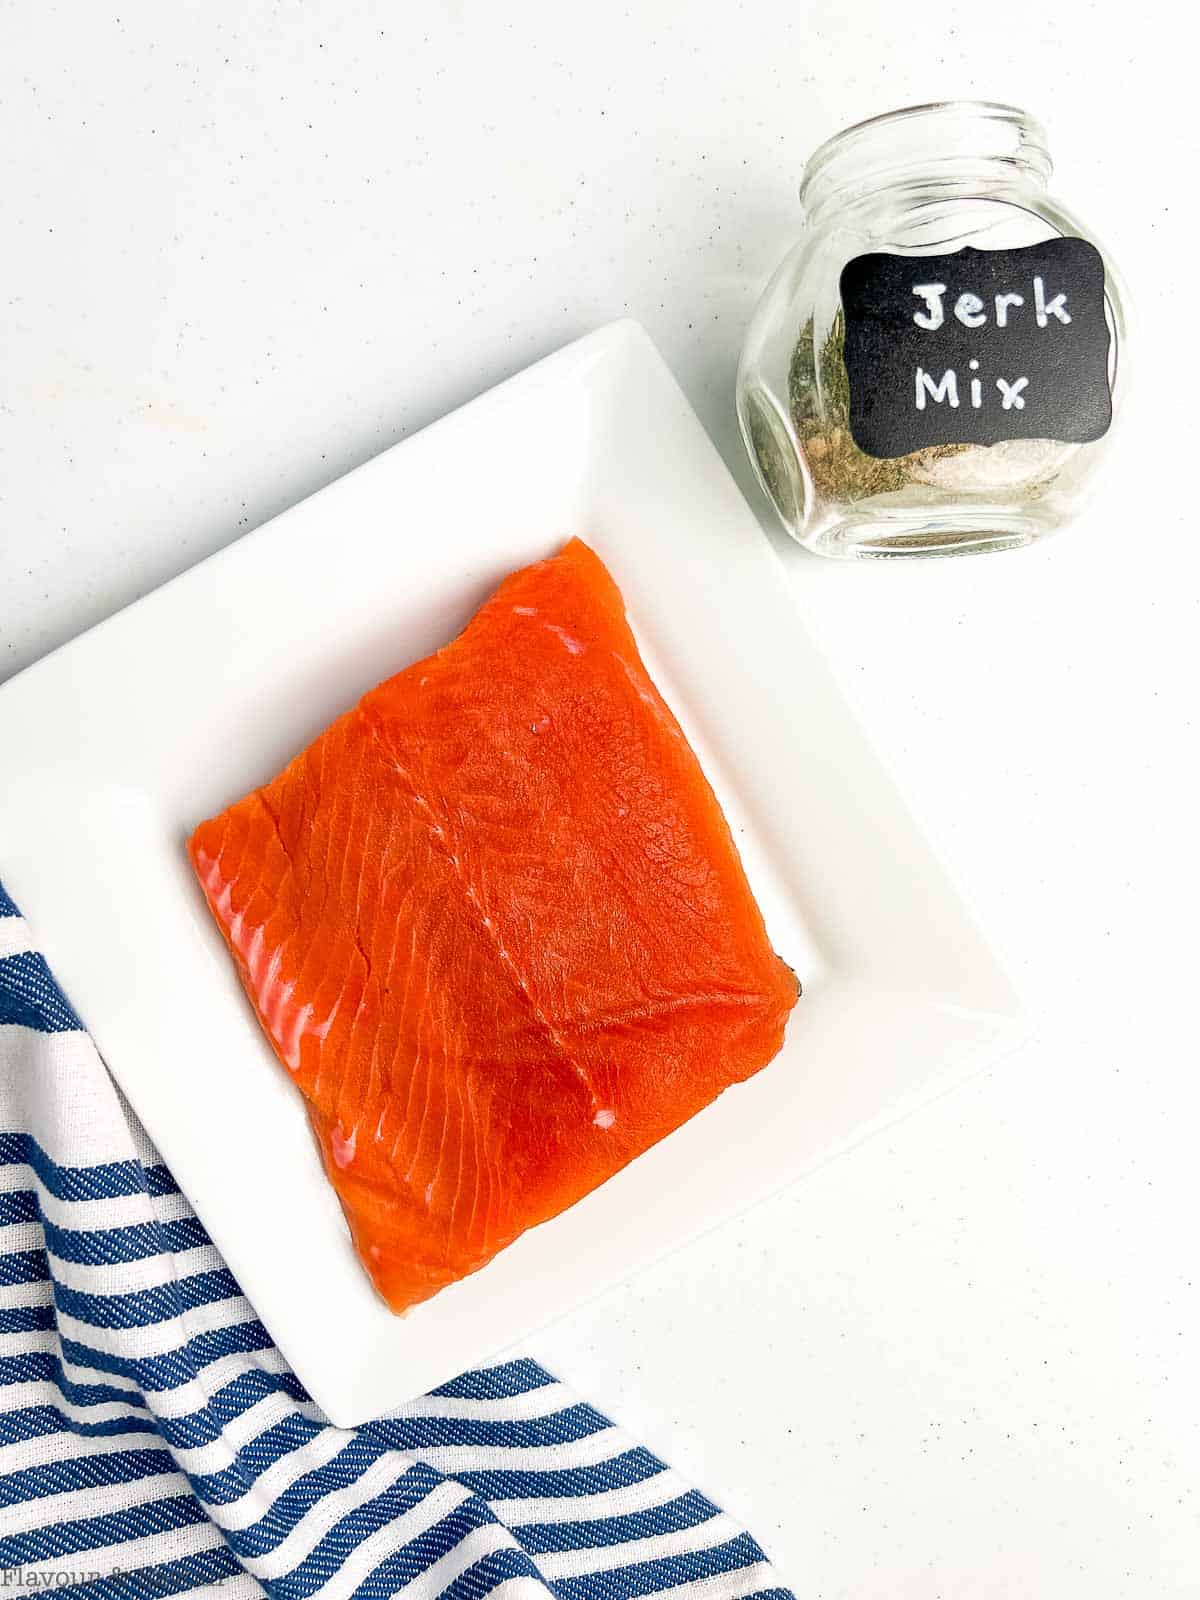 A salmon filet and a spice jar with jerk seasoning.